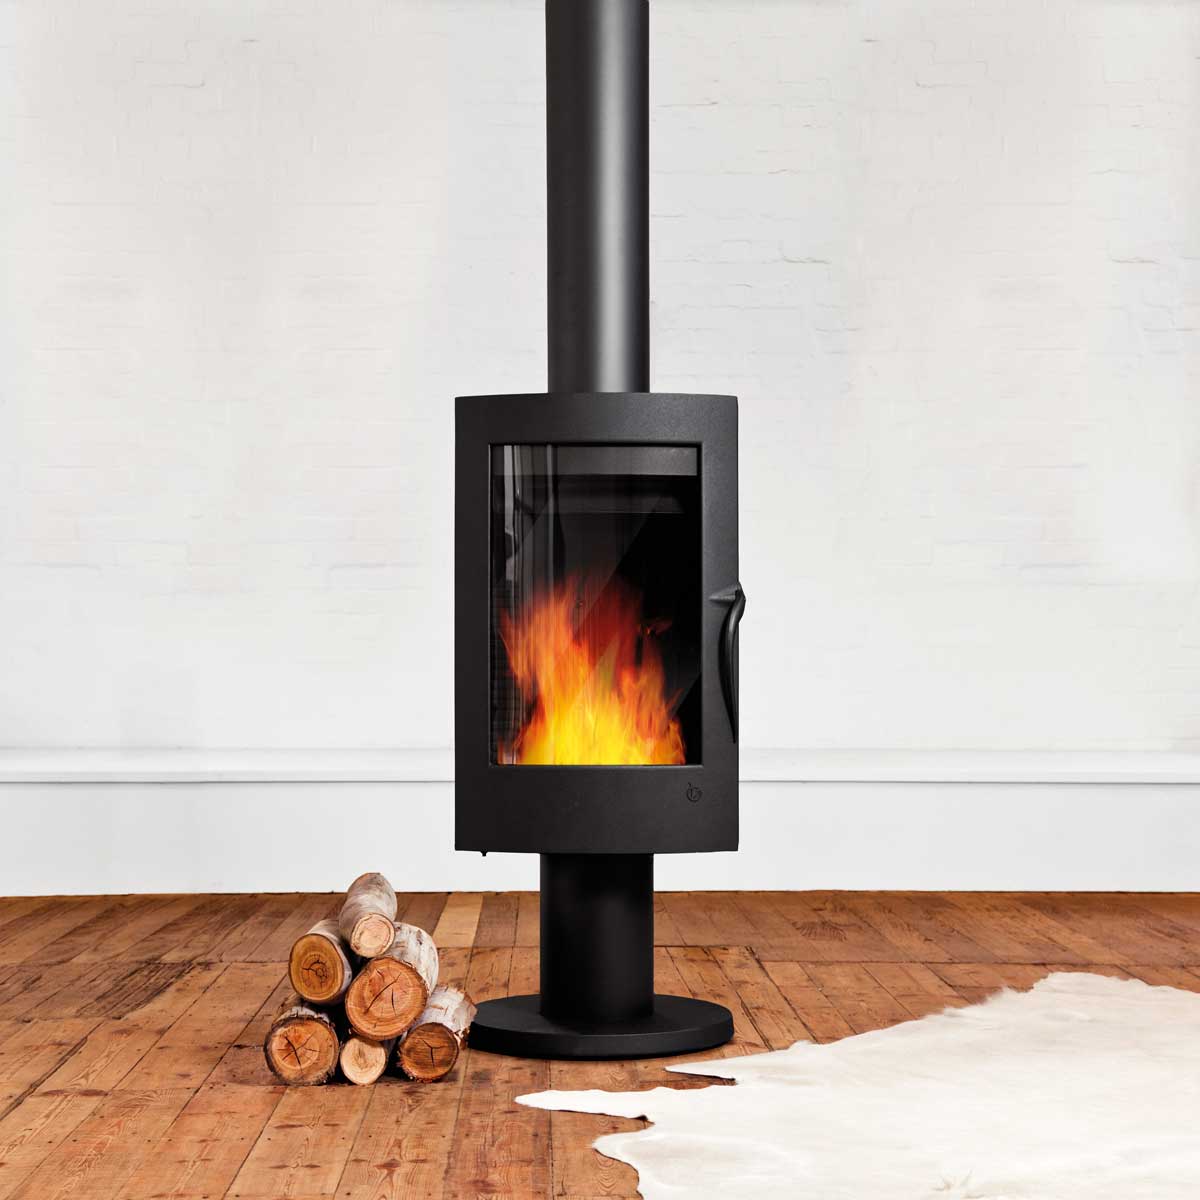 Invicta Pharos wood heater in minimalist room with white walls and timber floor